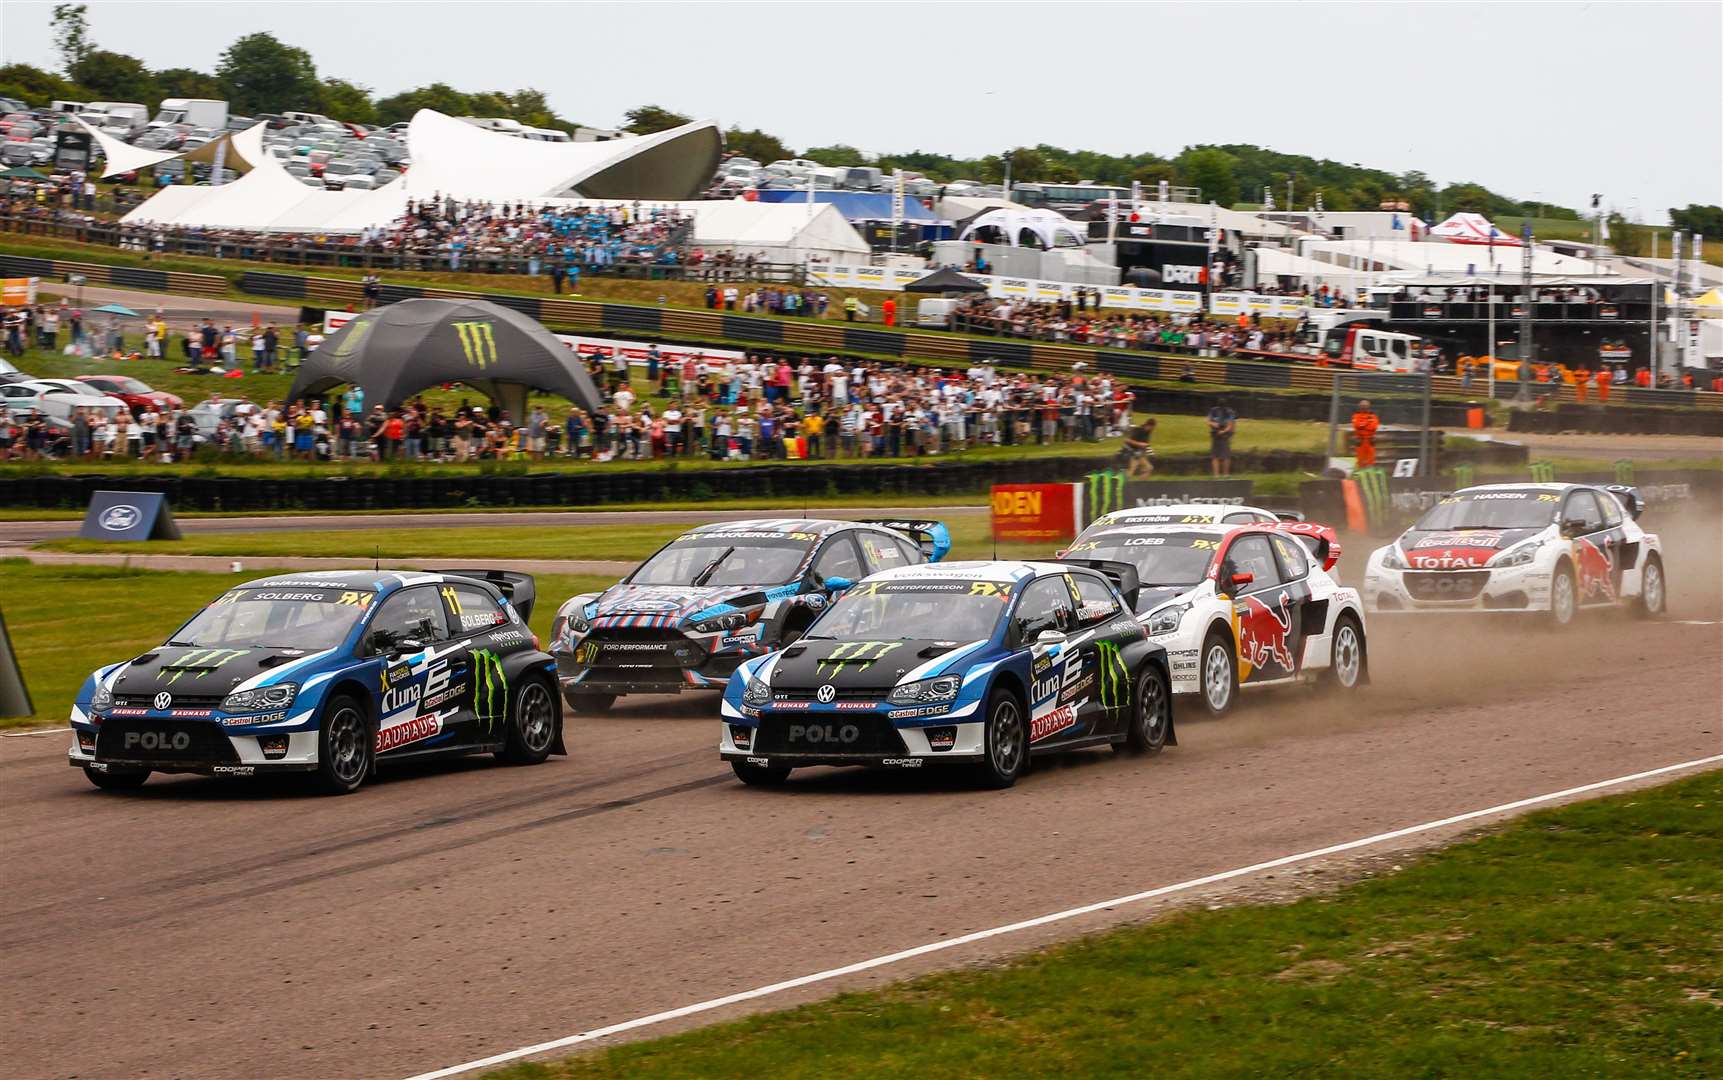 The world series last visited Lydden in 2017. Picture: FIA World Rallycross Championship